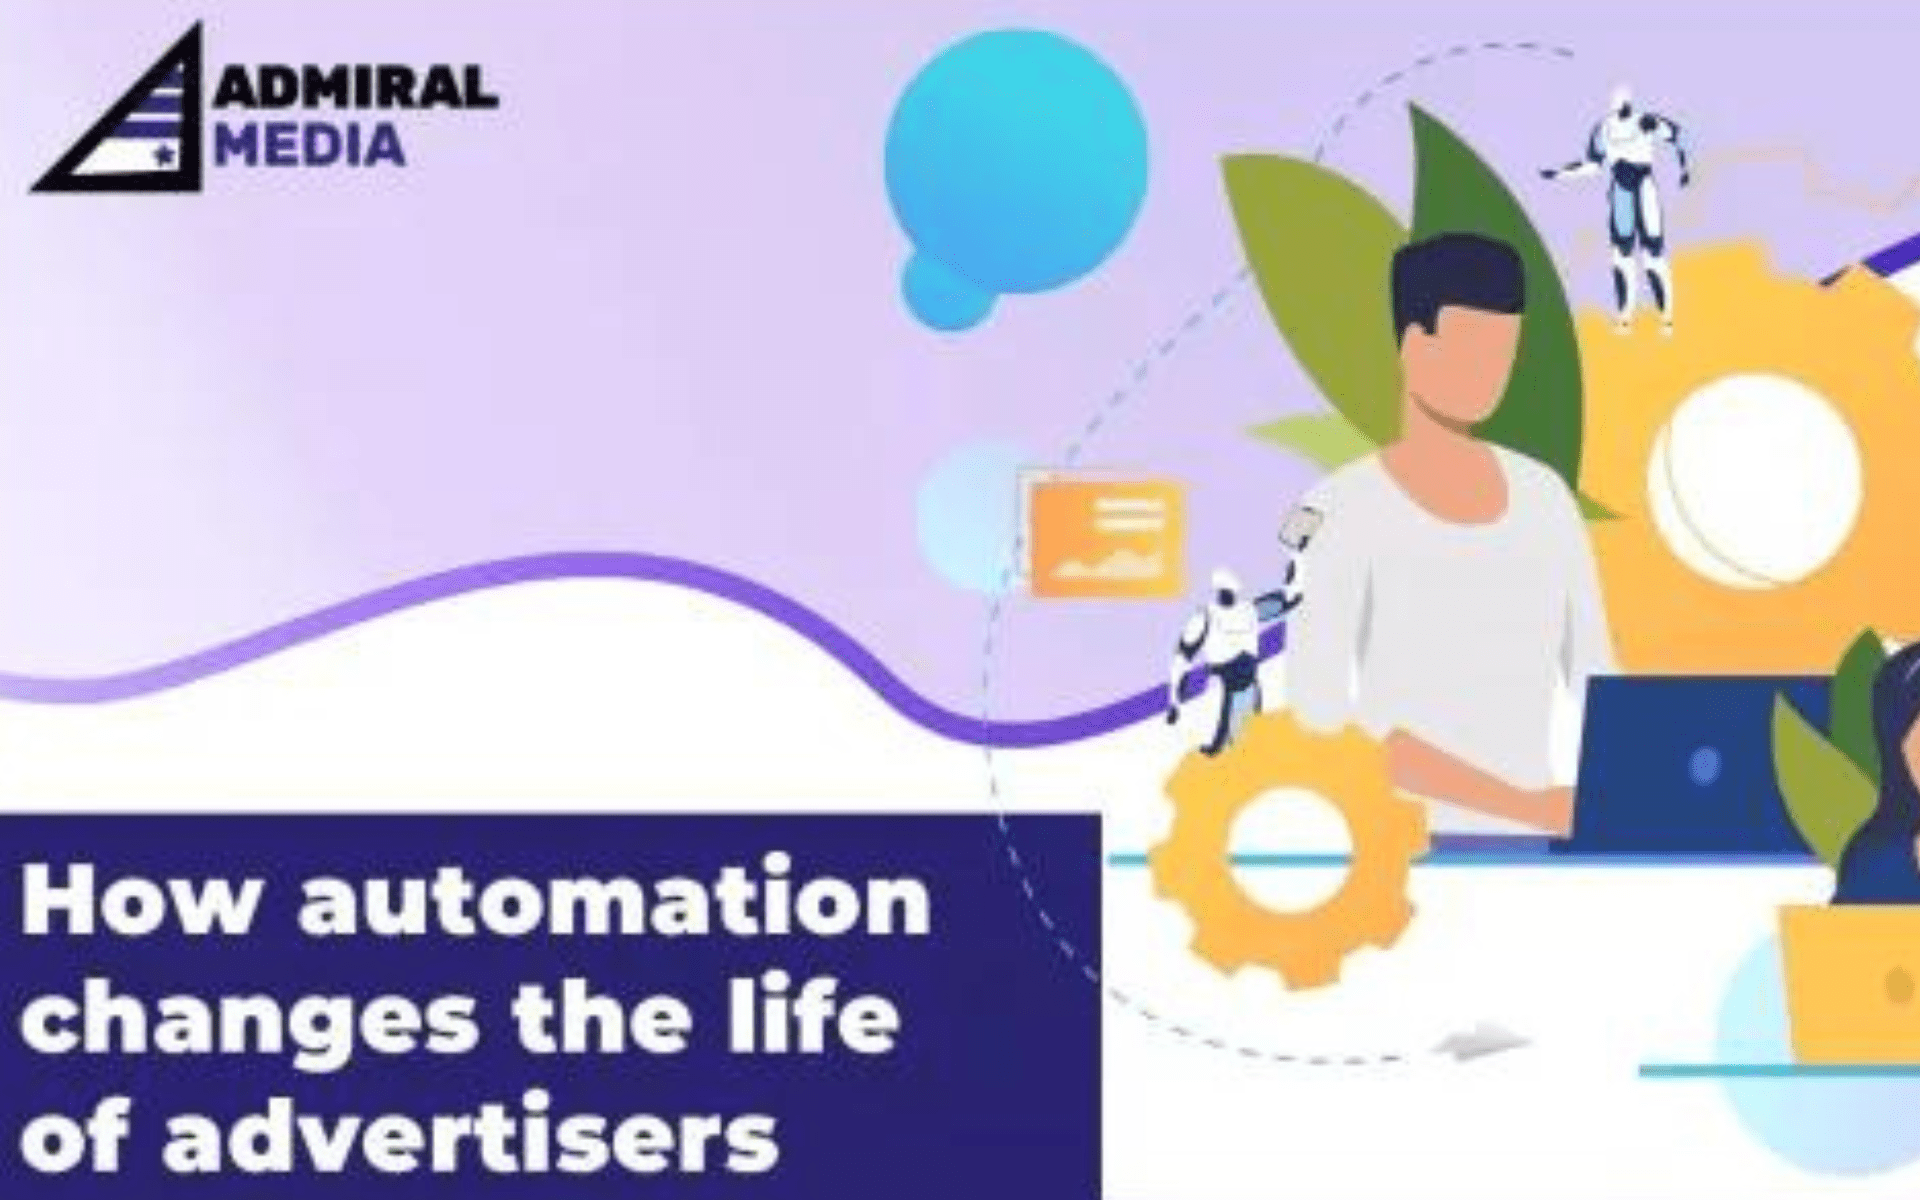 How automation changes the life of advertisers